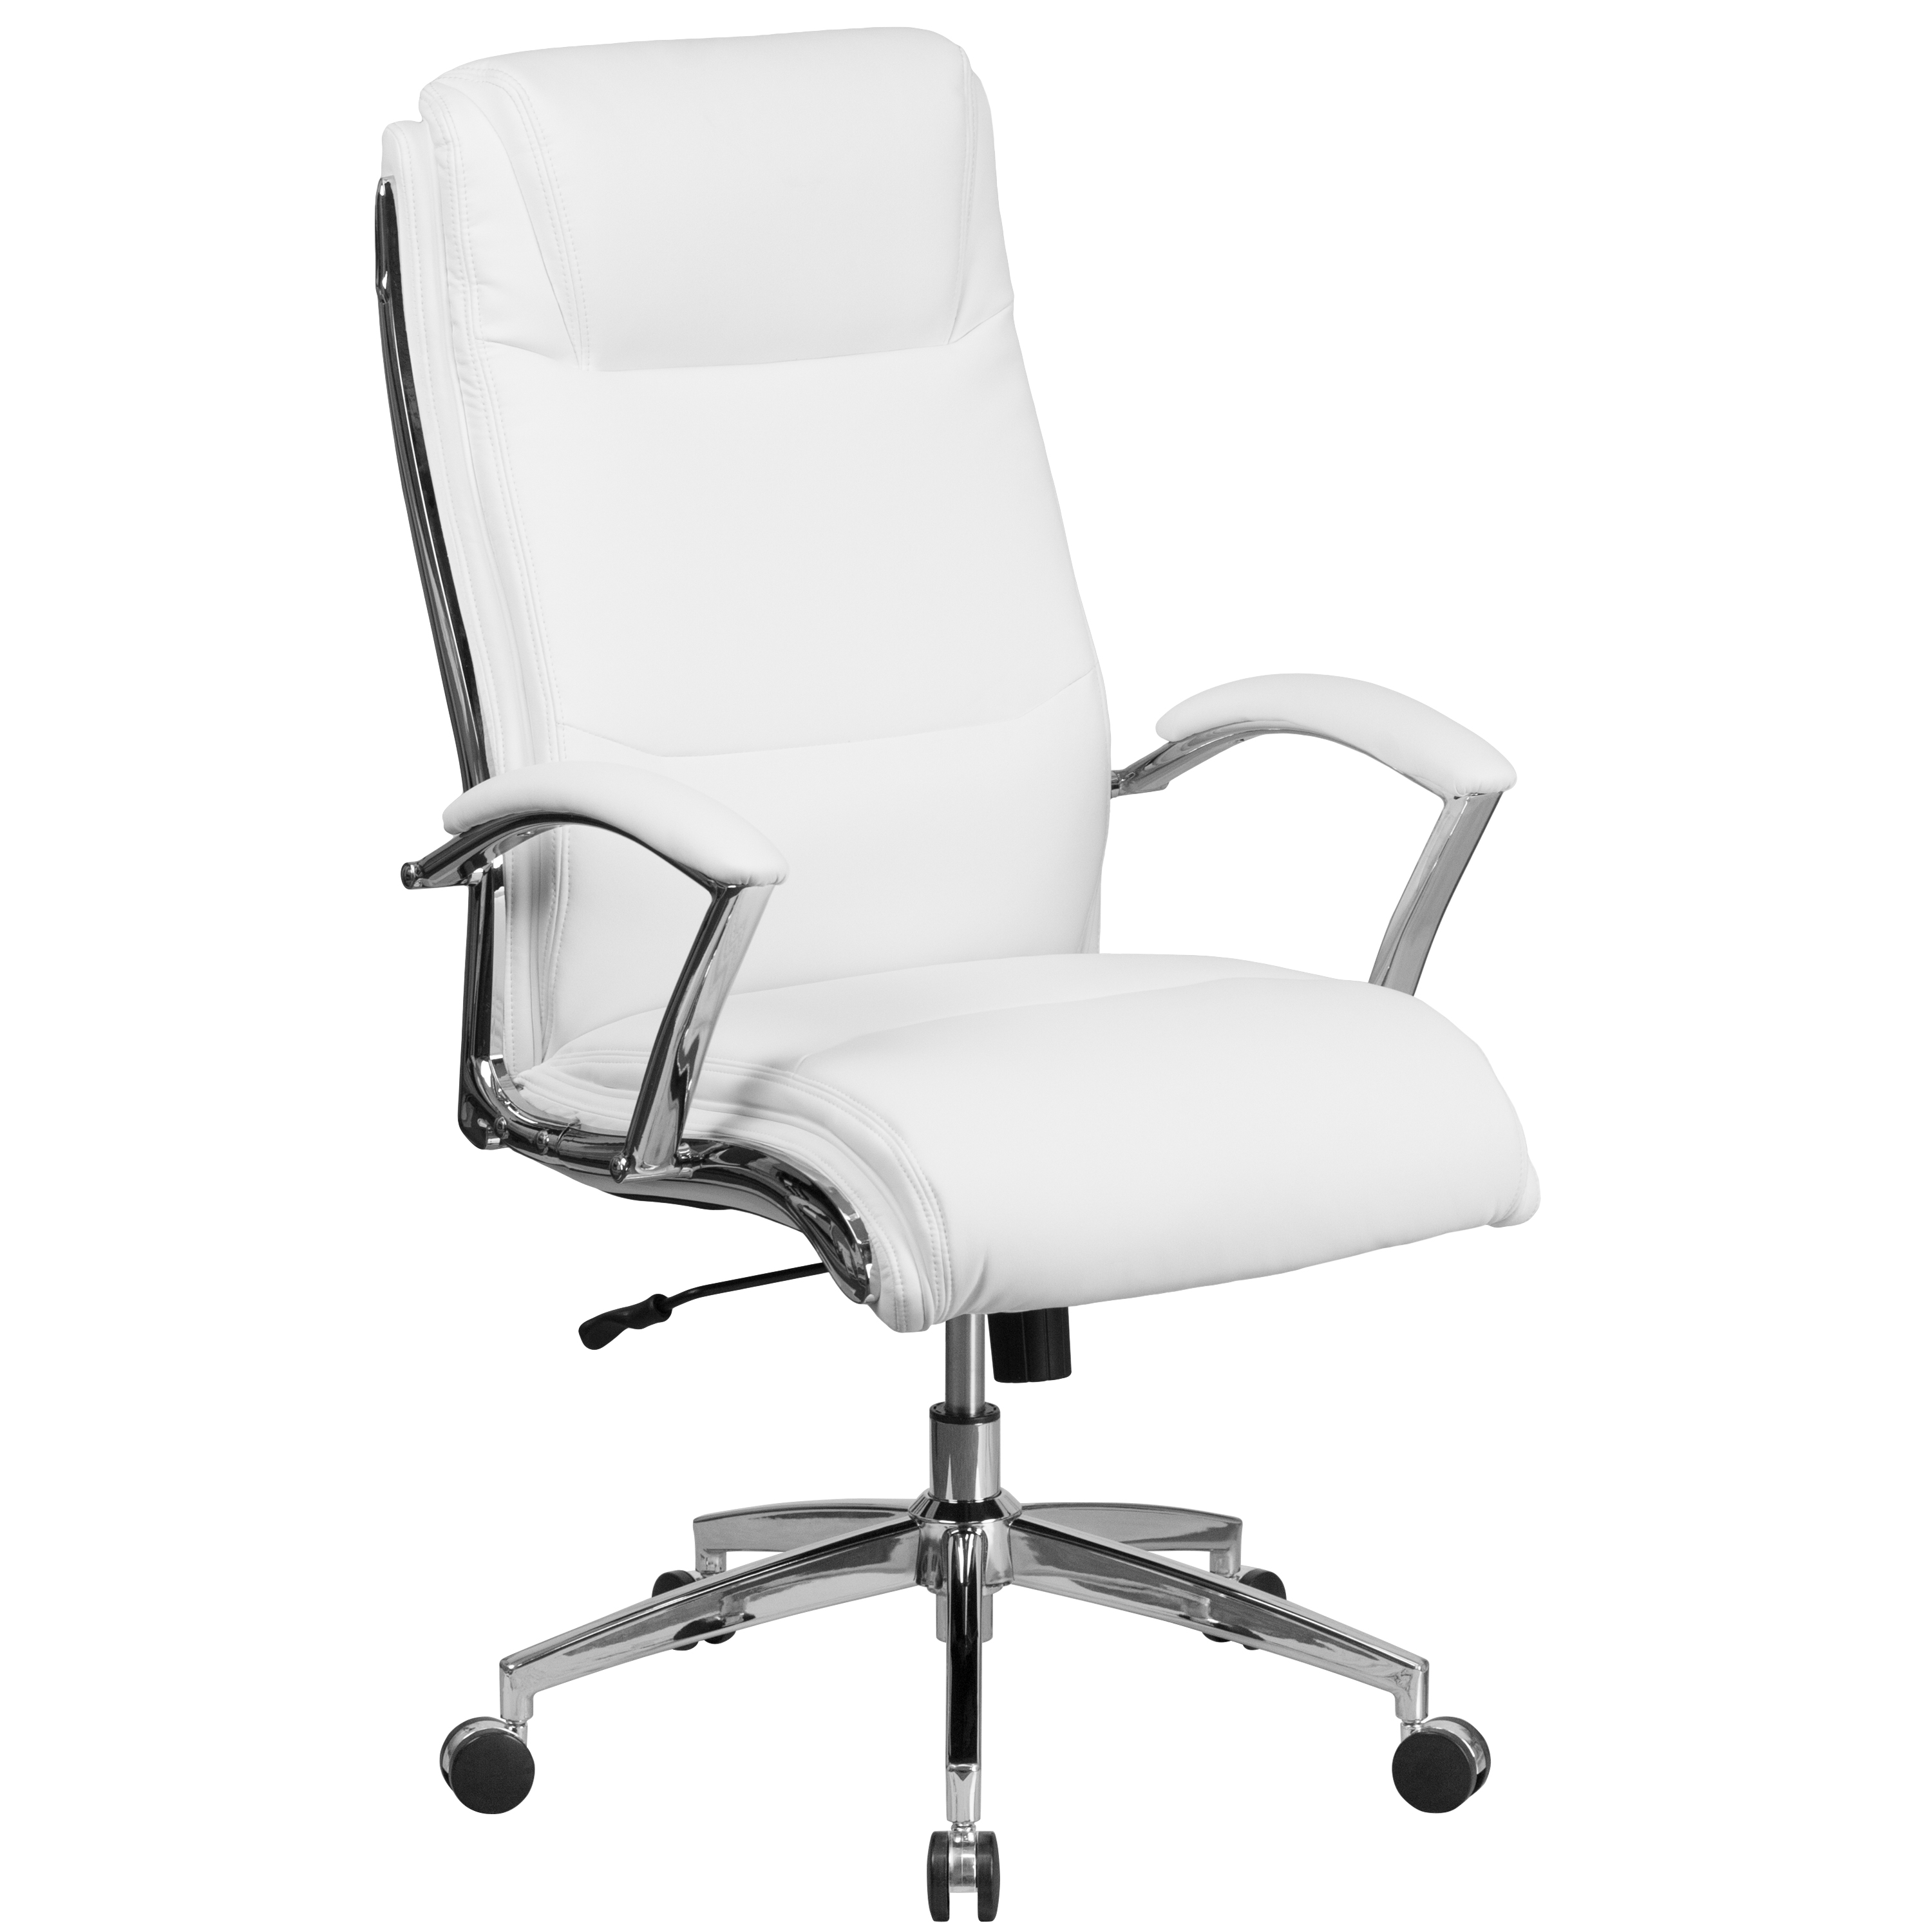 Flash Furniture GO-2192-WH-GG White High Back LeatherSoft Executive Swivel Office Chair with Chrome Base and Arms